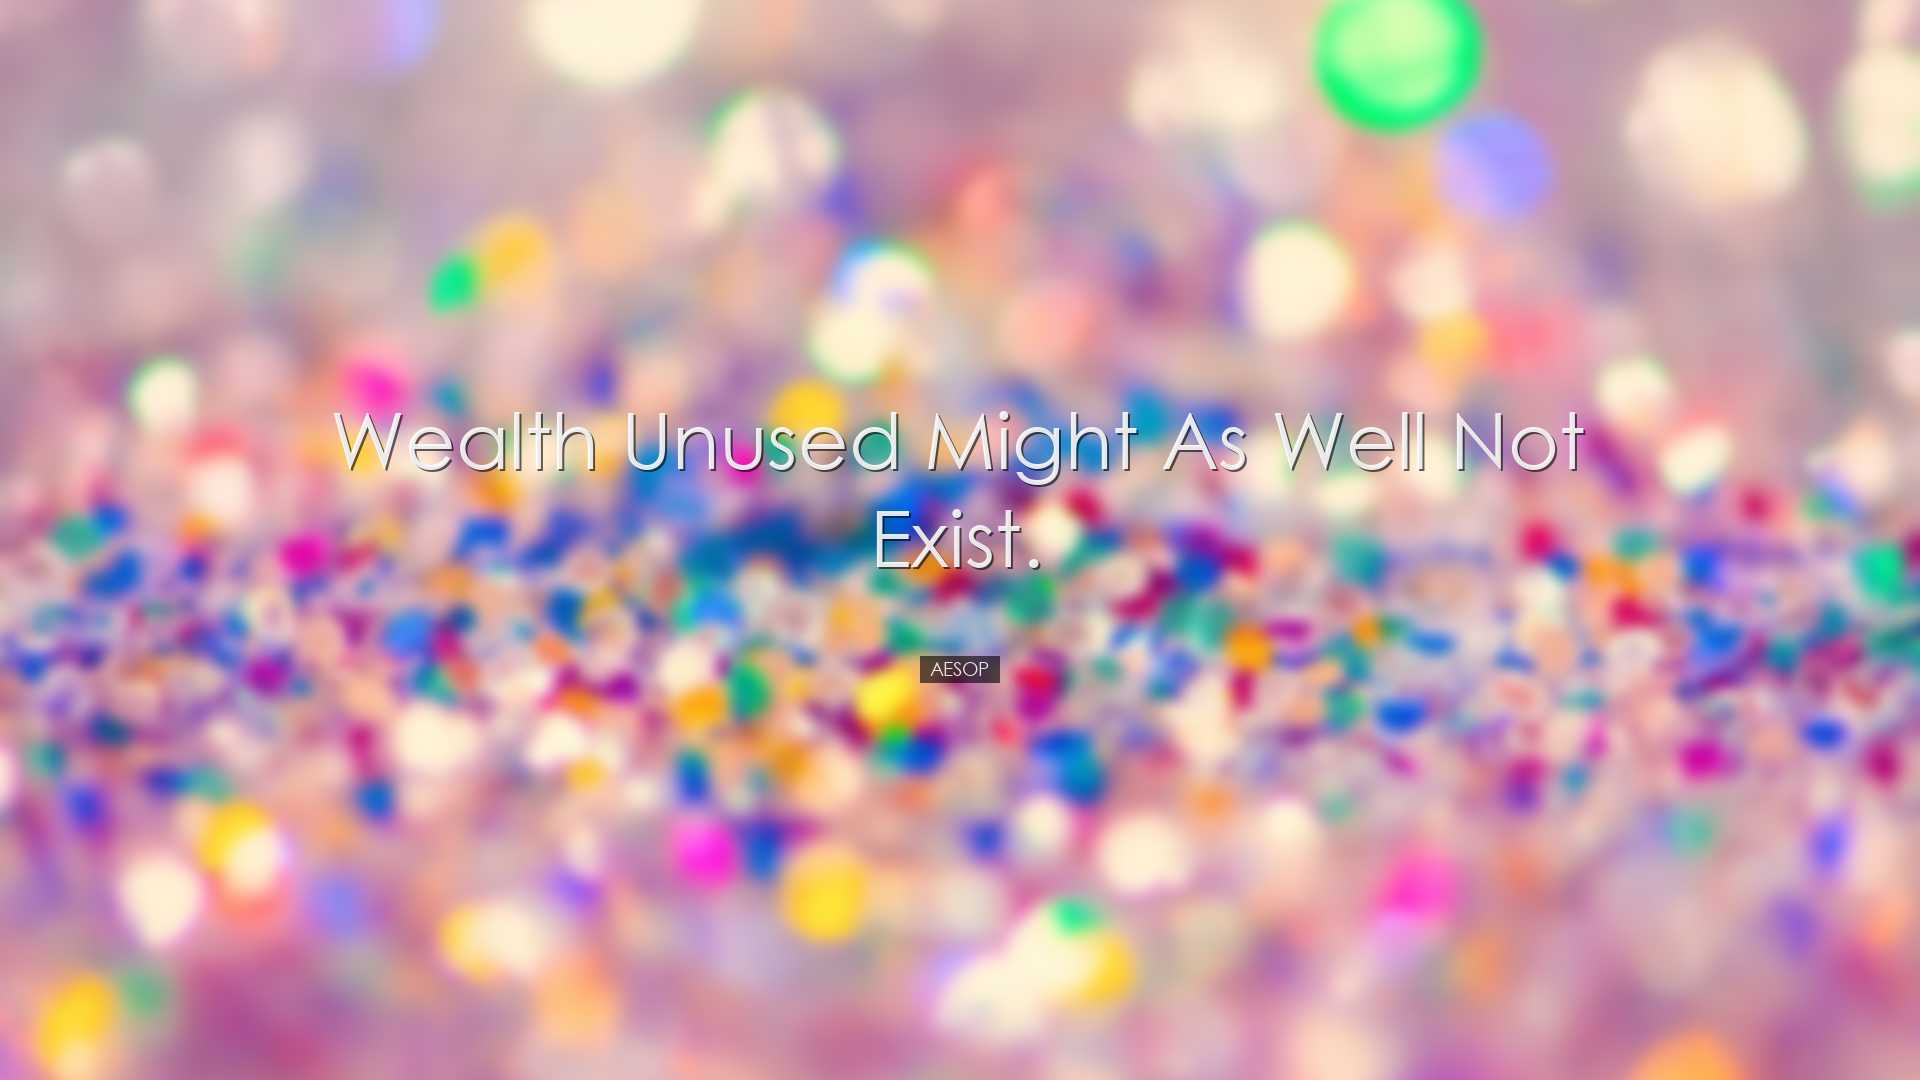 Wealth unused might as well not exist. - Aesop